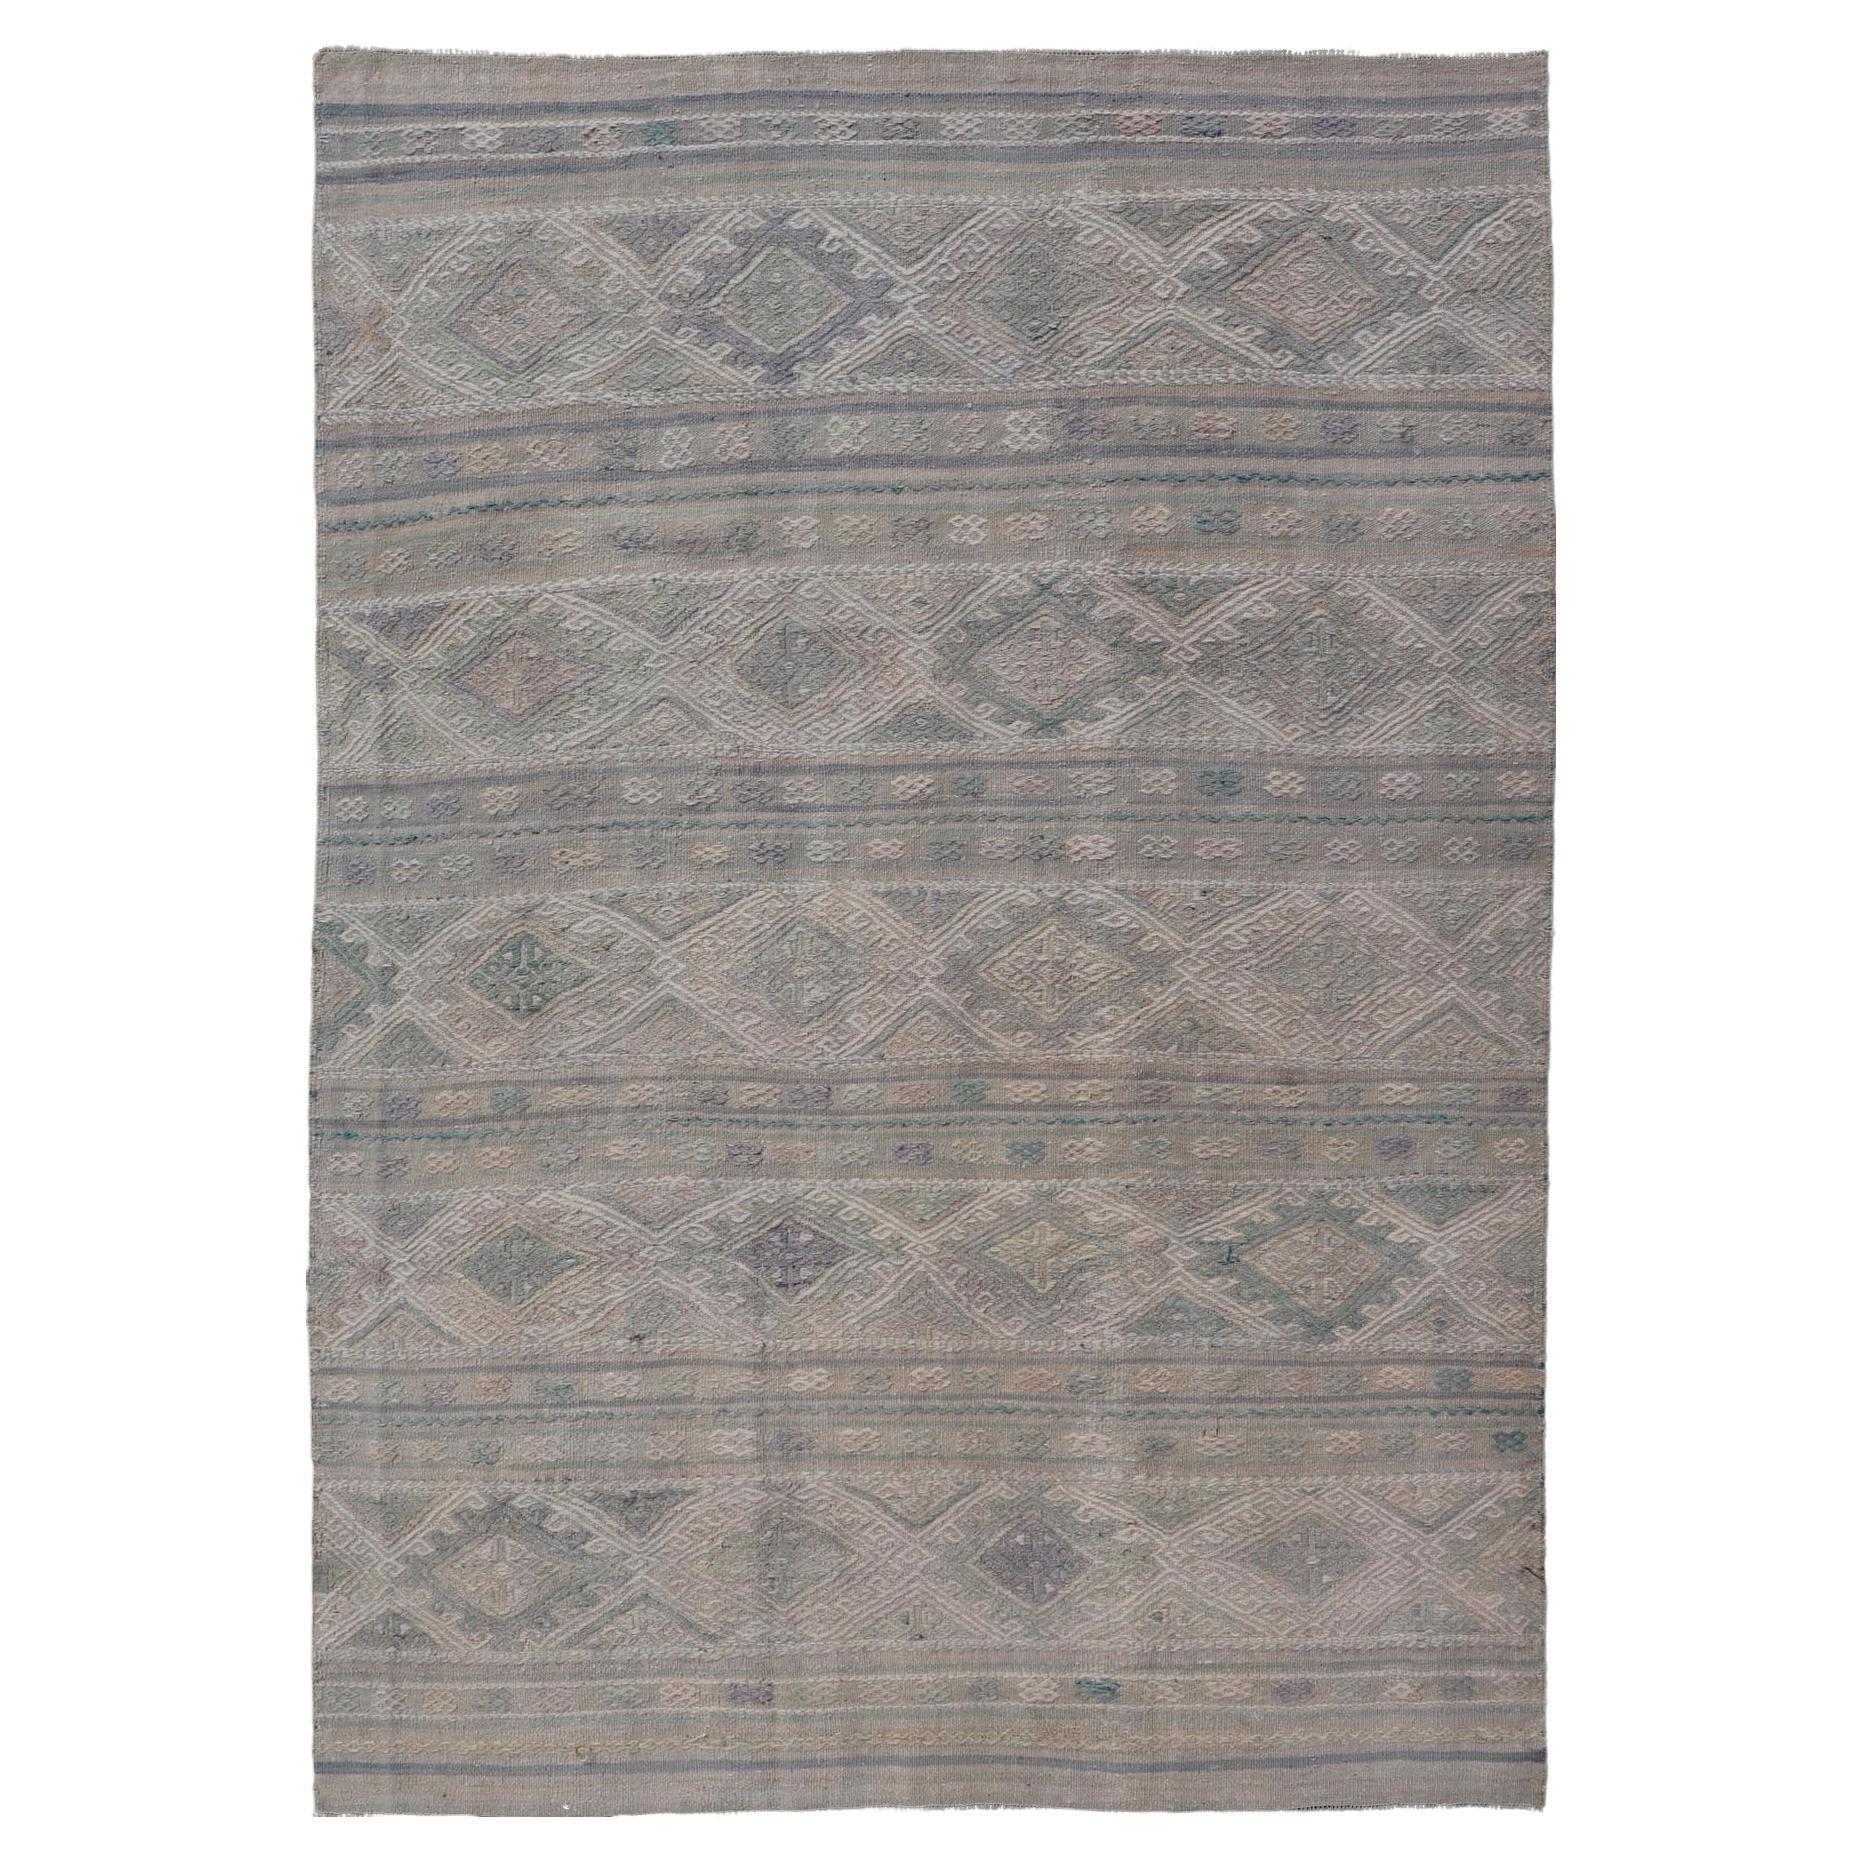 Vintage Turkish Flat-Weave Kilim with Stripes and Embroideries With Gray-Green For Sale